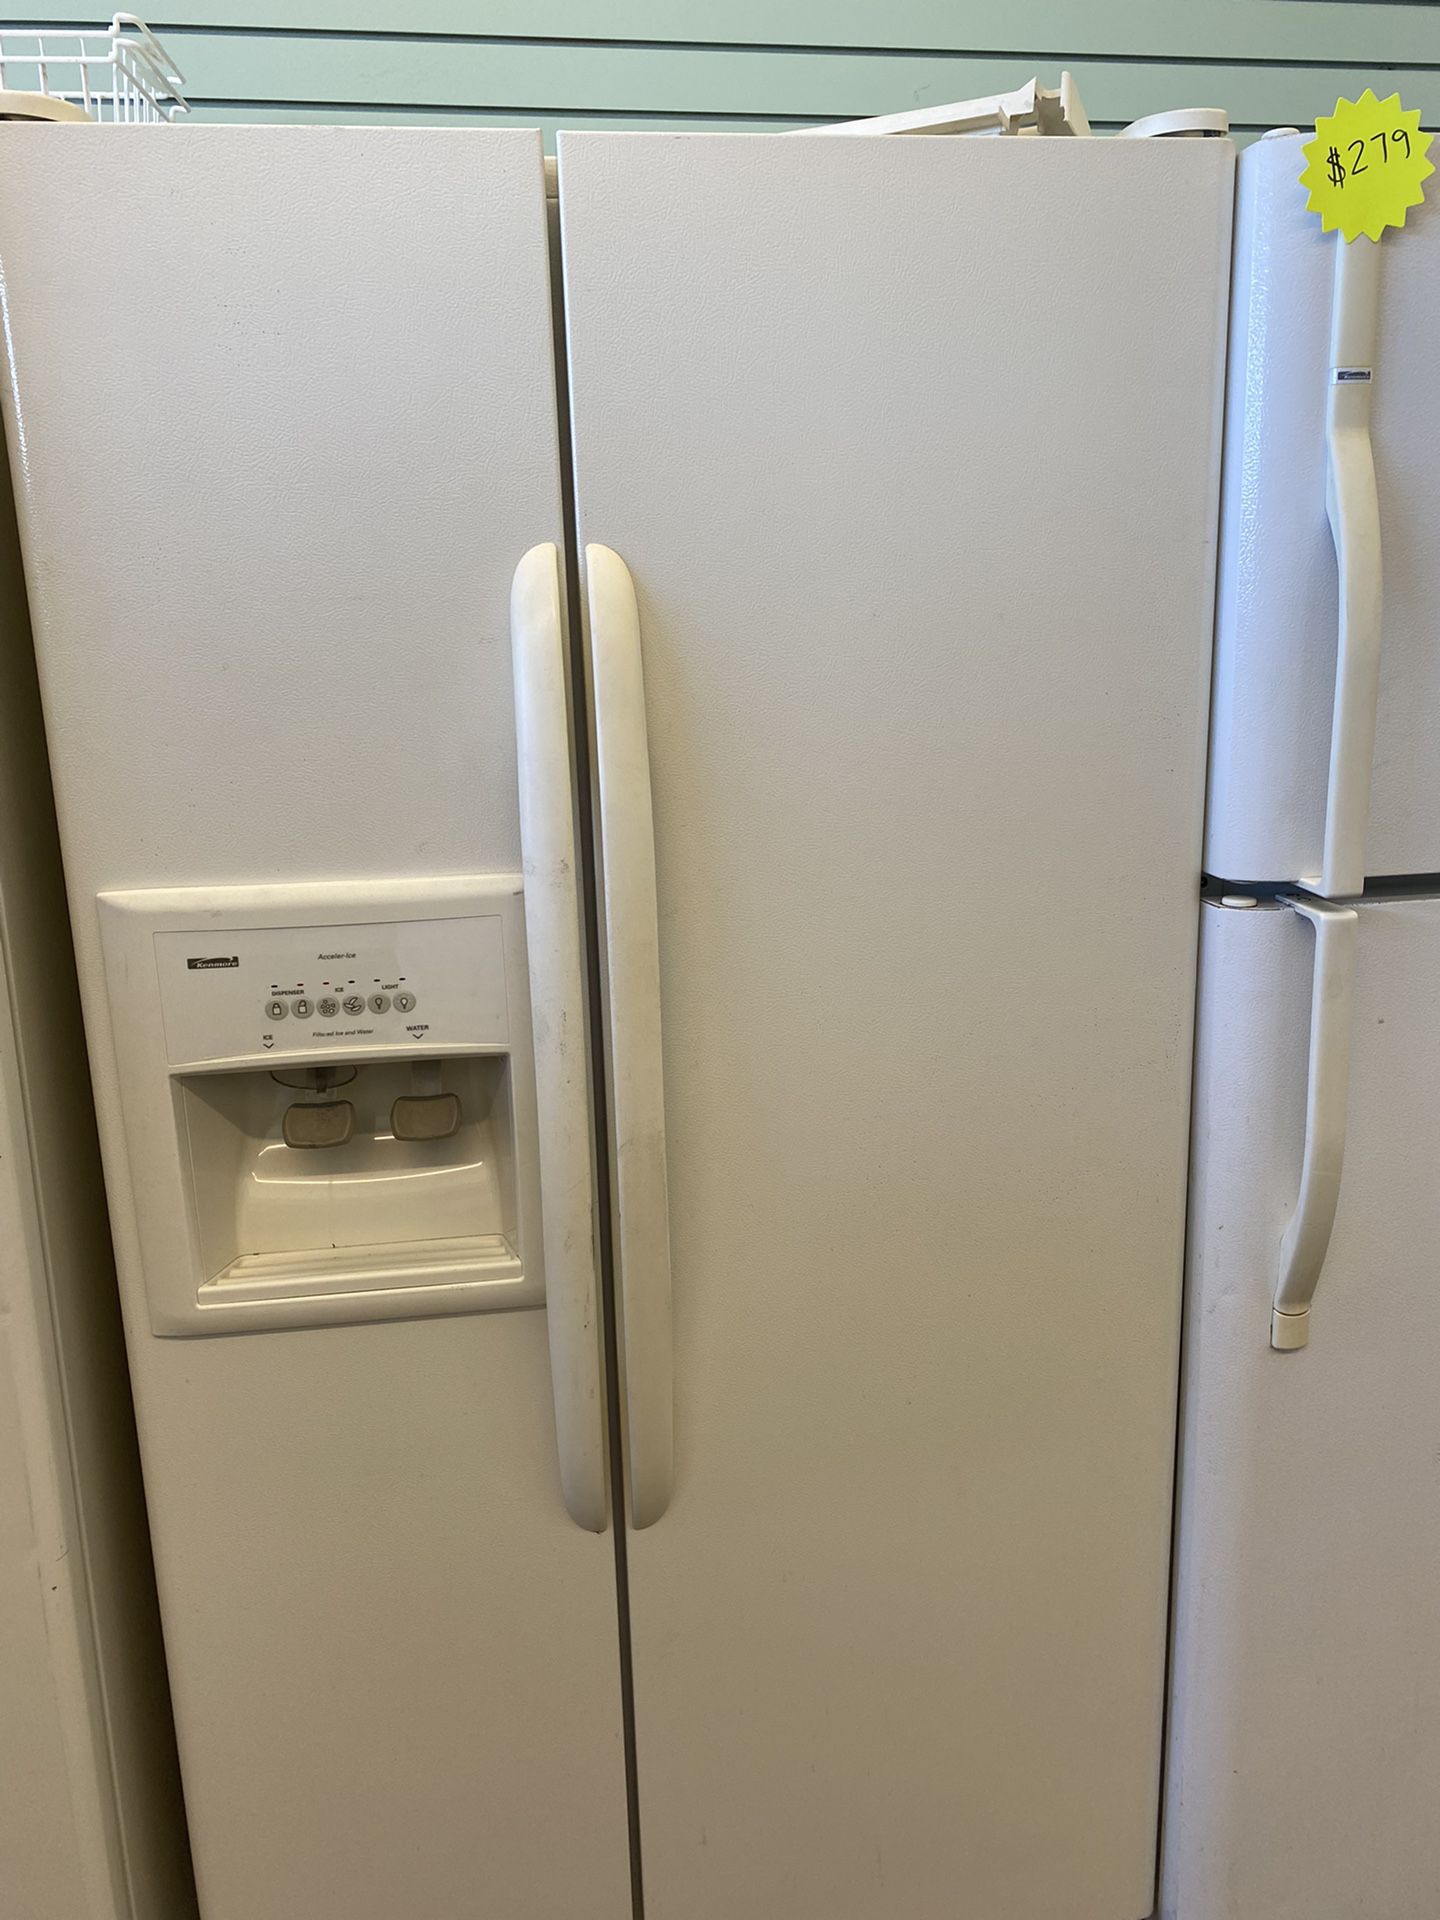 🌺KENMORE SIDE BY SIDE REFRIGERATOR $275🌺